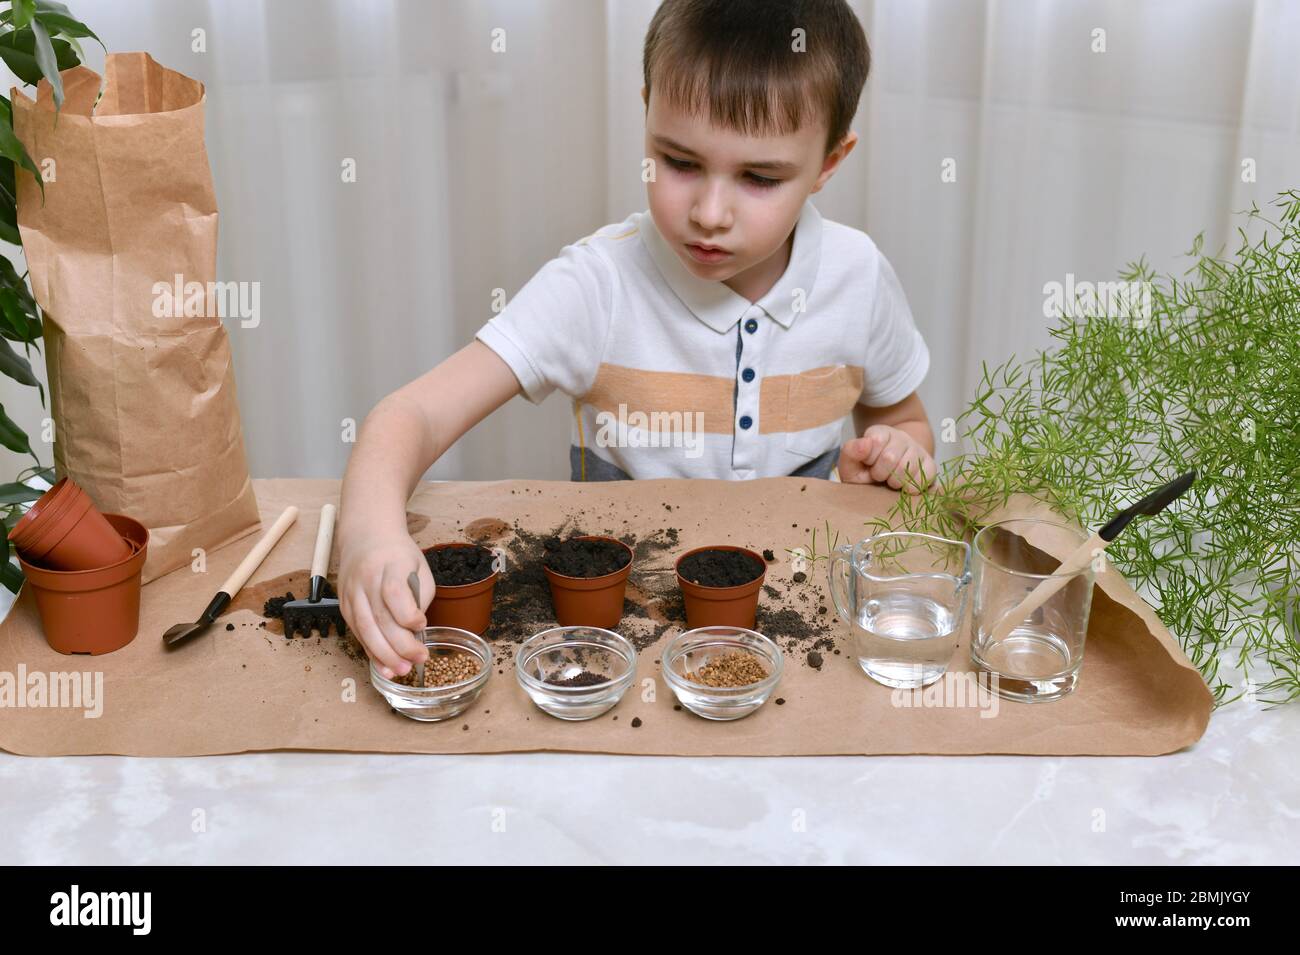 The child is busy planting micro greens seeds in small pots. The serious boy takes tweezers seeds. Stock Photo